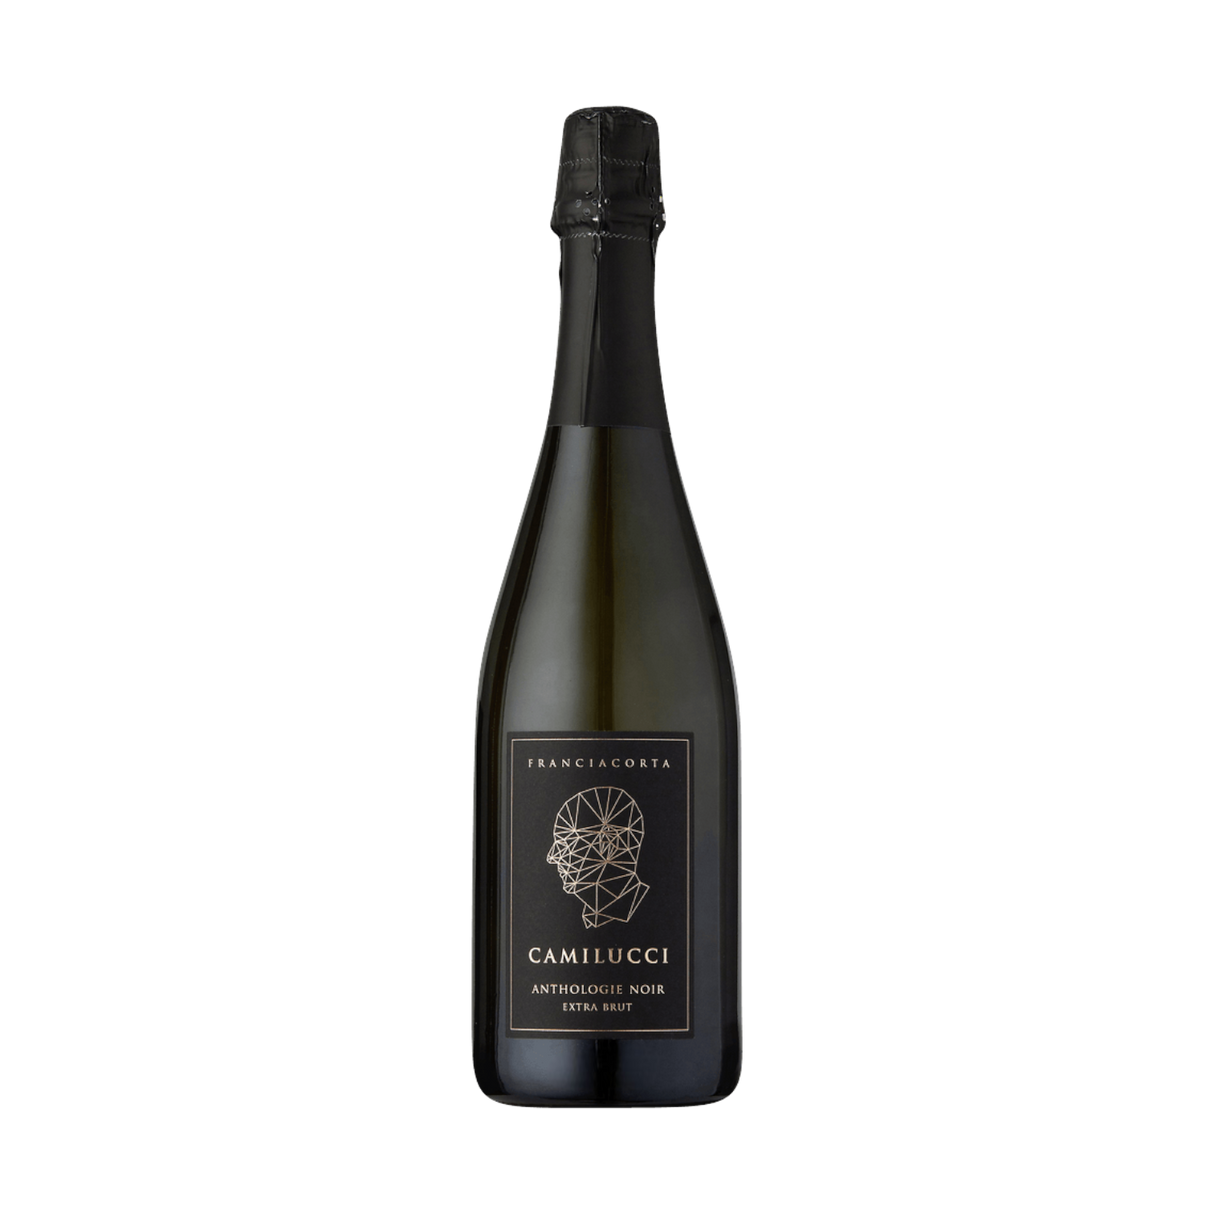 2018 Camilucci Anthologie Noir Extra Brut Franciacorta DOCG (Limited Qty)